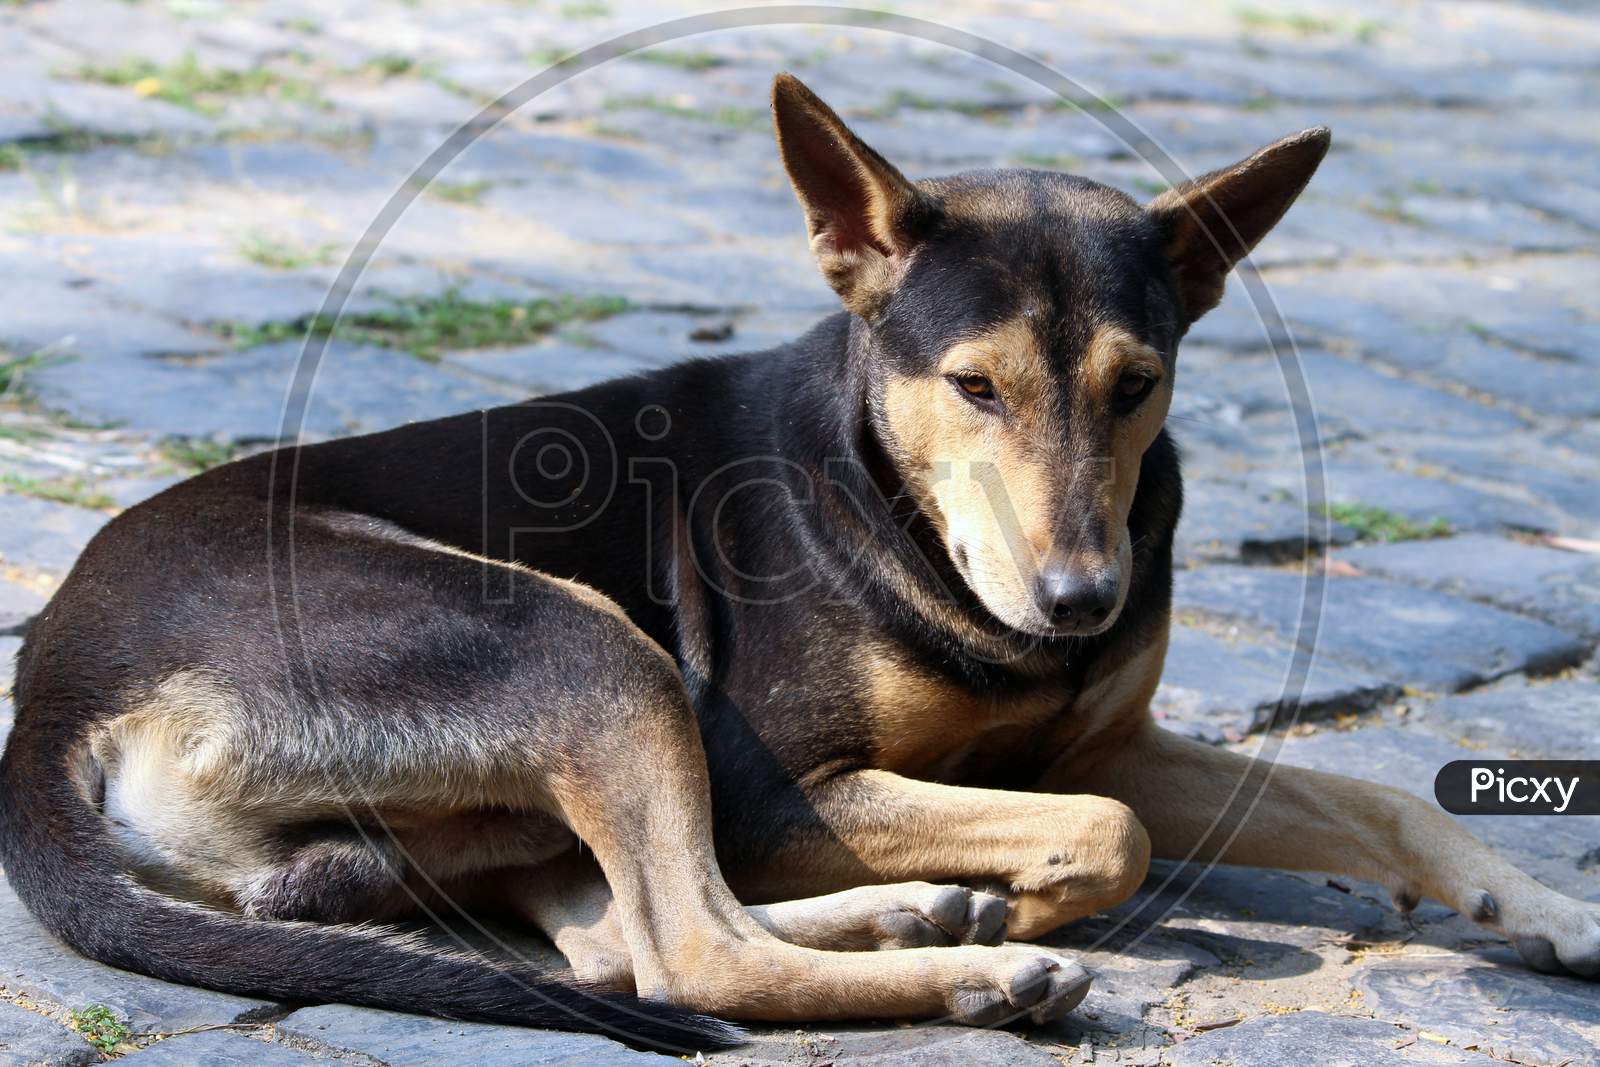 The cute Indian street dog looking at camera